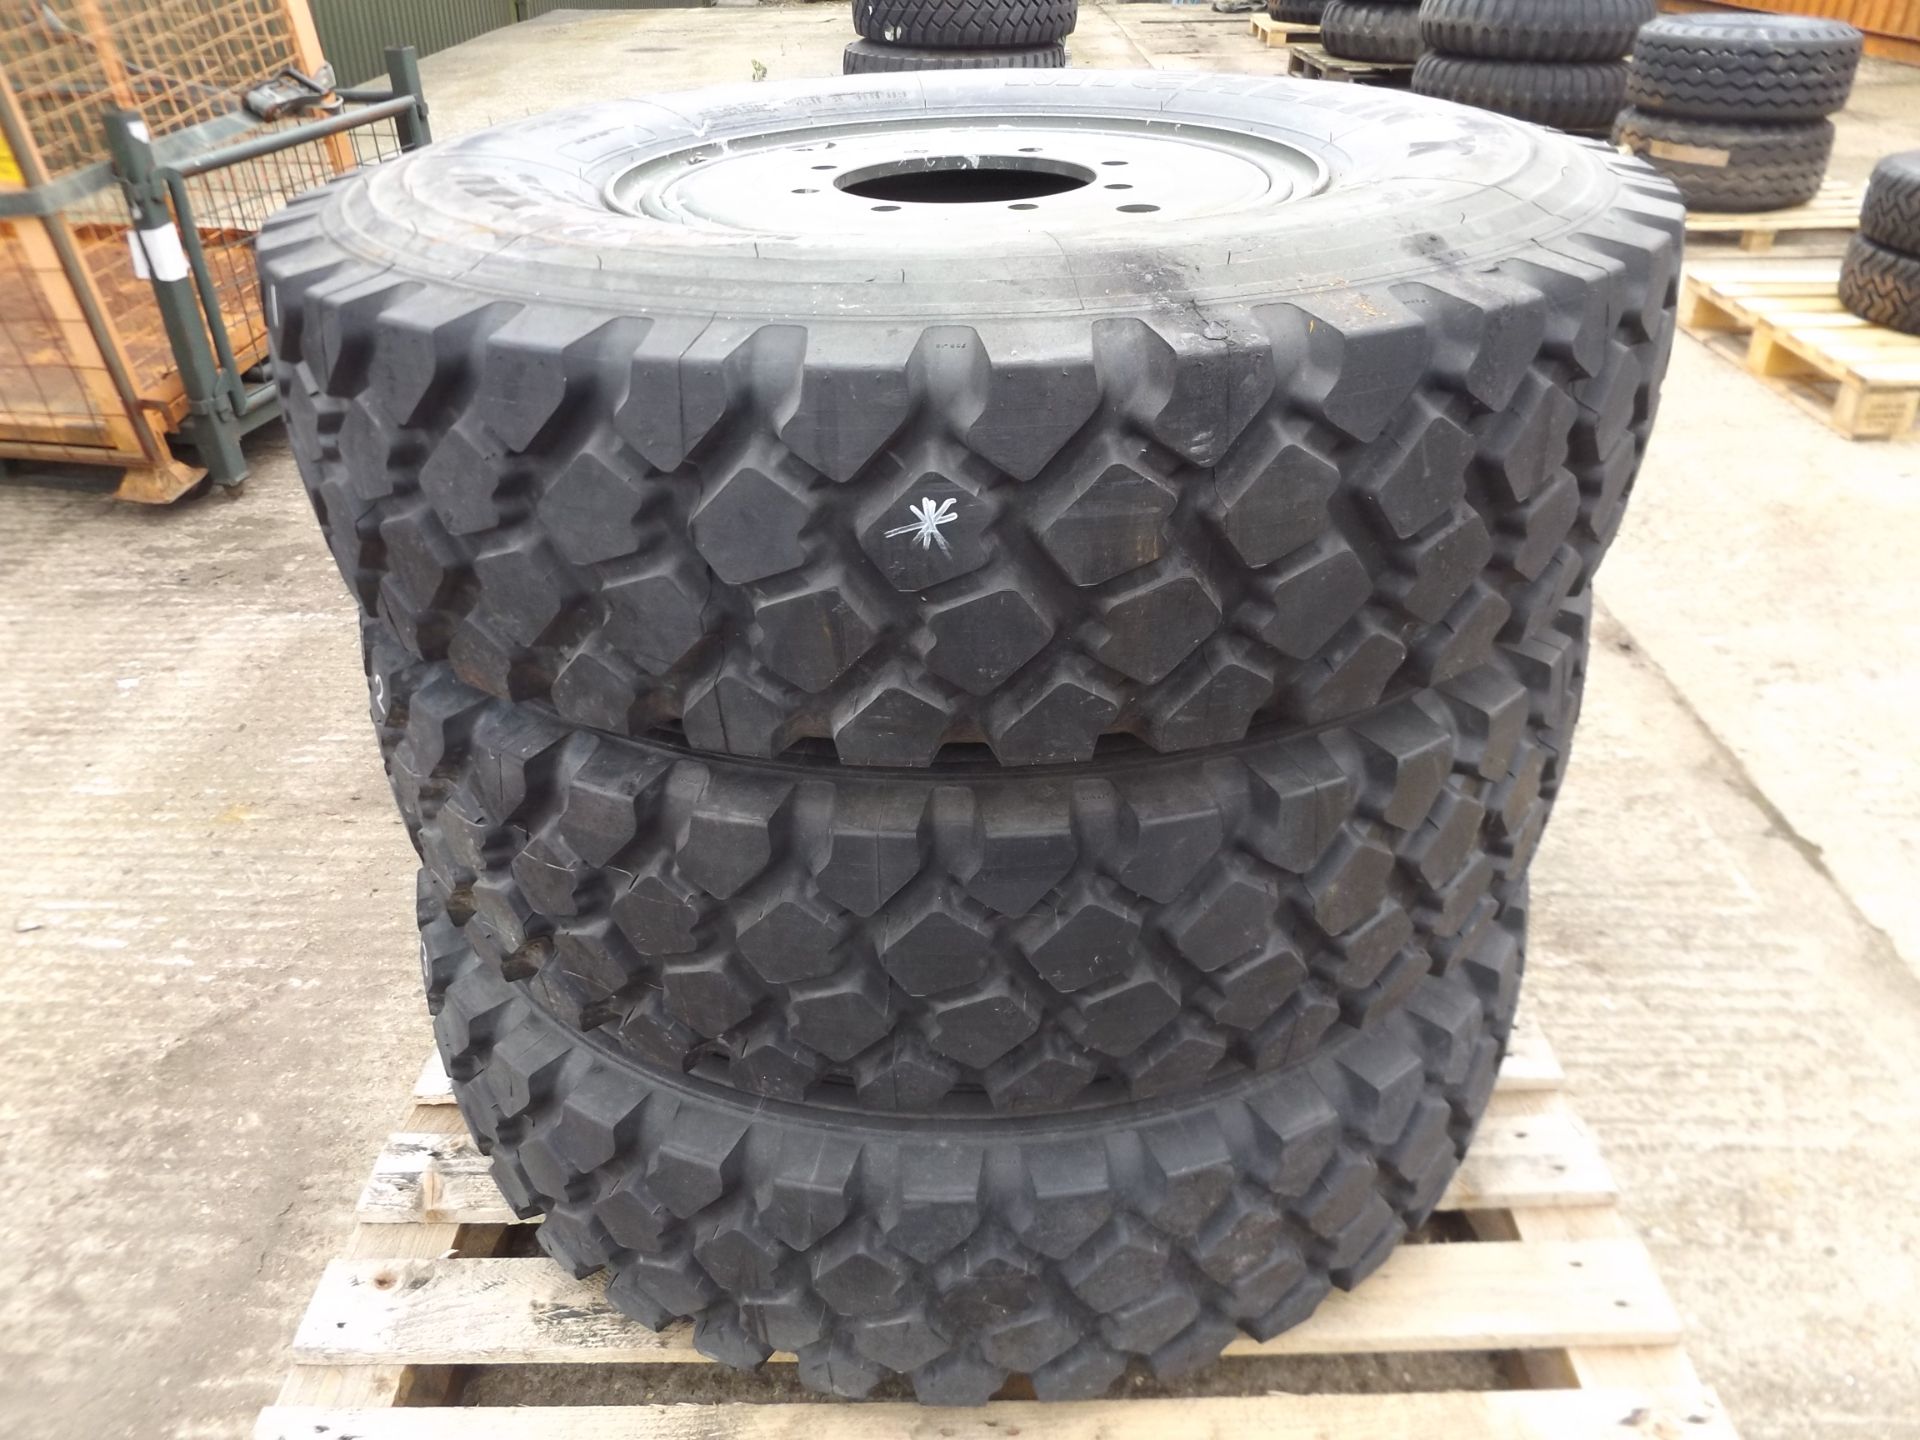 3 x Michelin 12.00 R20 XZL Tyres complete with 8 stud rims